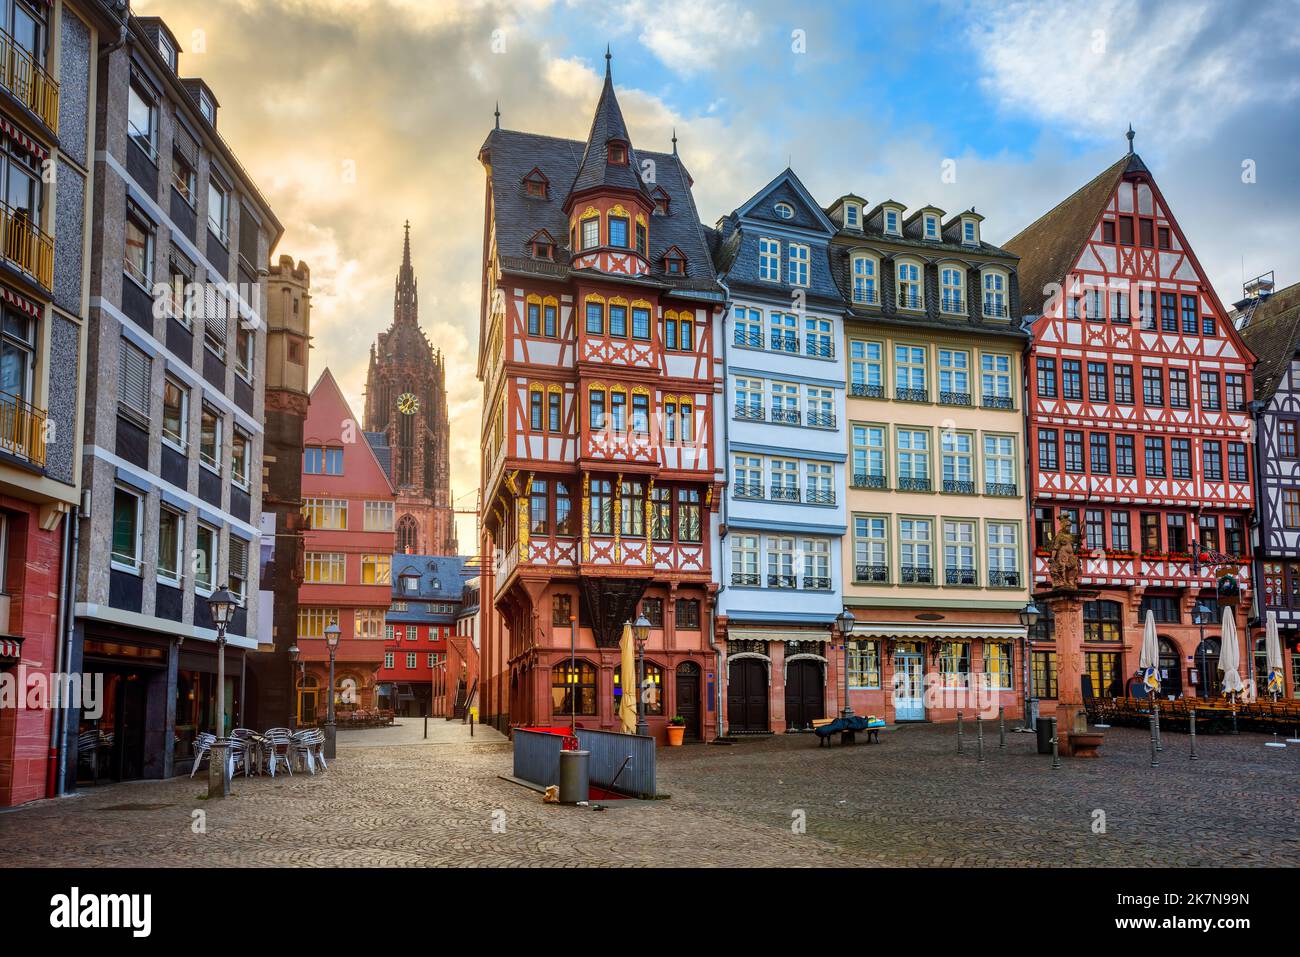 Gothic Frankfurt Cathedral and colorful half-timbered houses on historical Roemerberg square in Frankfurt am Main city center, Germany Stock Photo